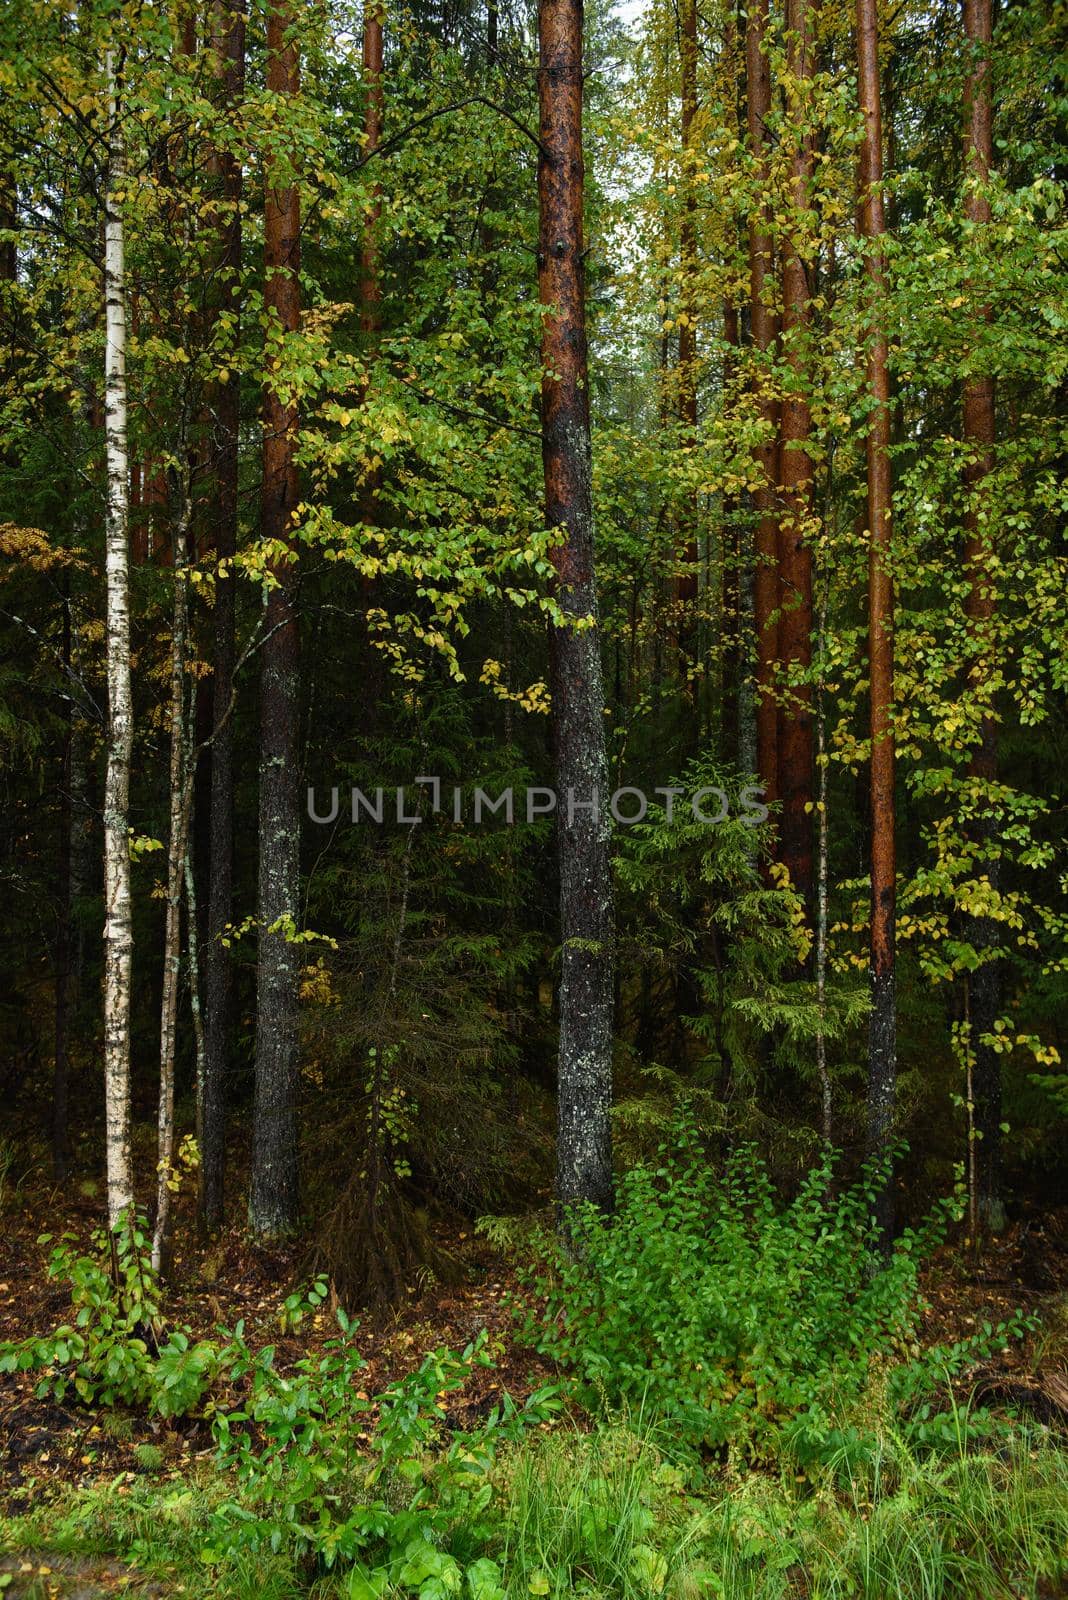 Colors of autumn. Landscape. Mixed forest. Colorful leaves and herbs in early autumn.